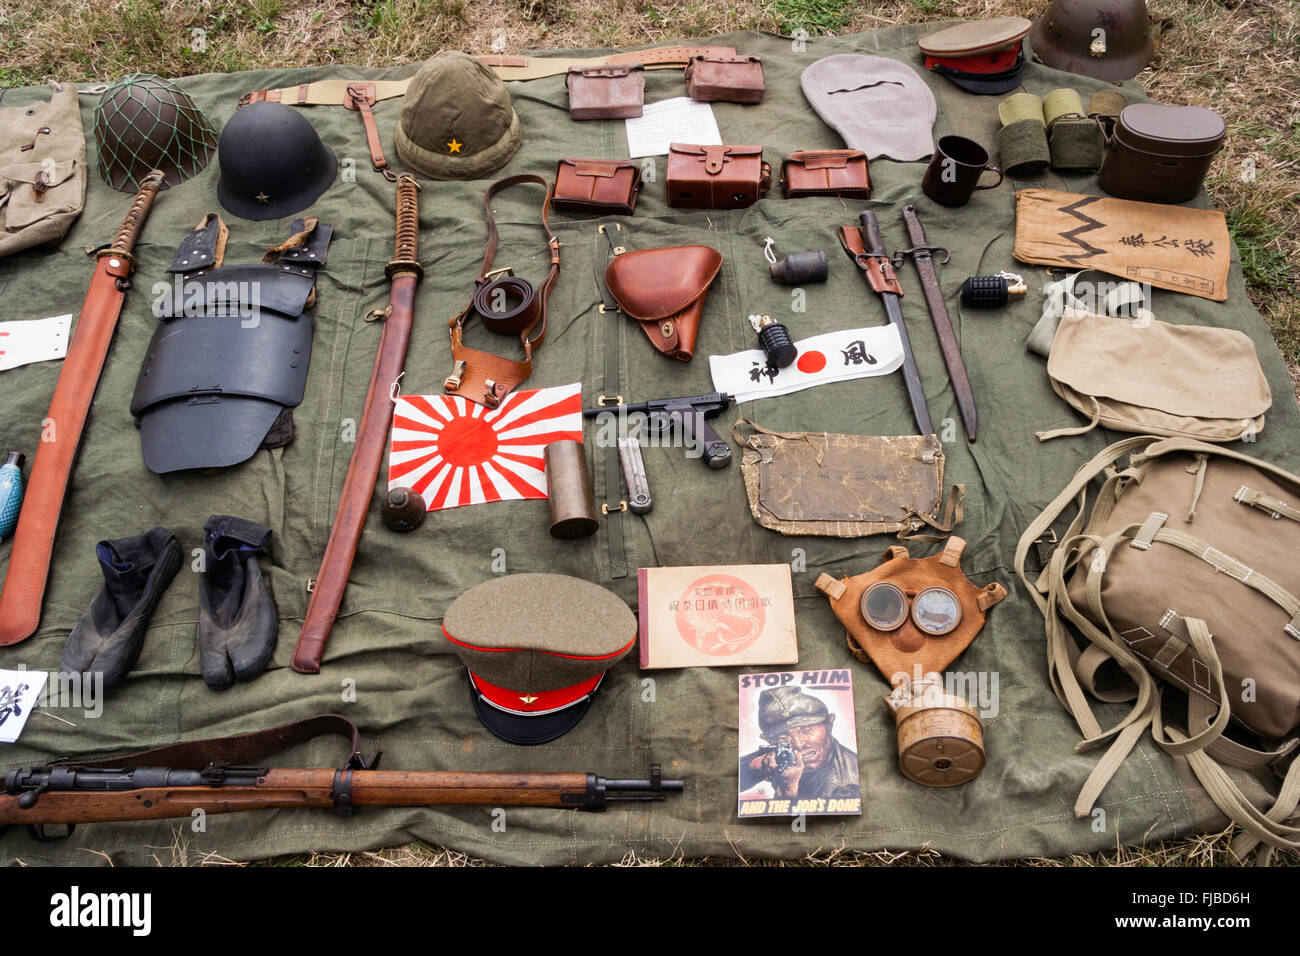 War and Peace show, England. Display of WW2 Japanese Imperial Army equipment laid-out on groundsheet. Includes gas mask, helmets, armour and caps. Stock Photo